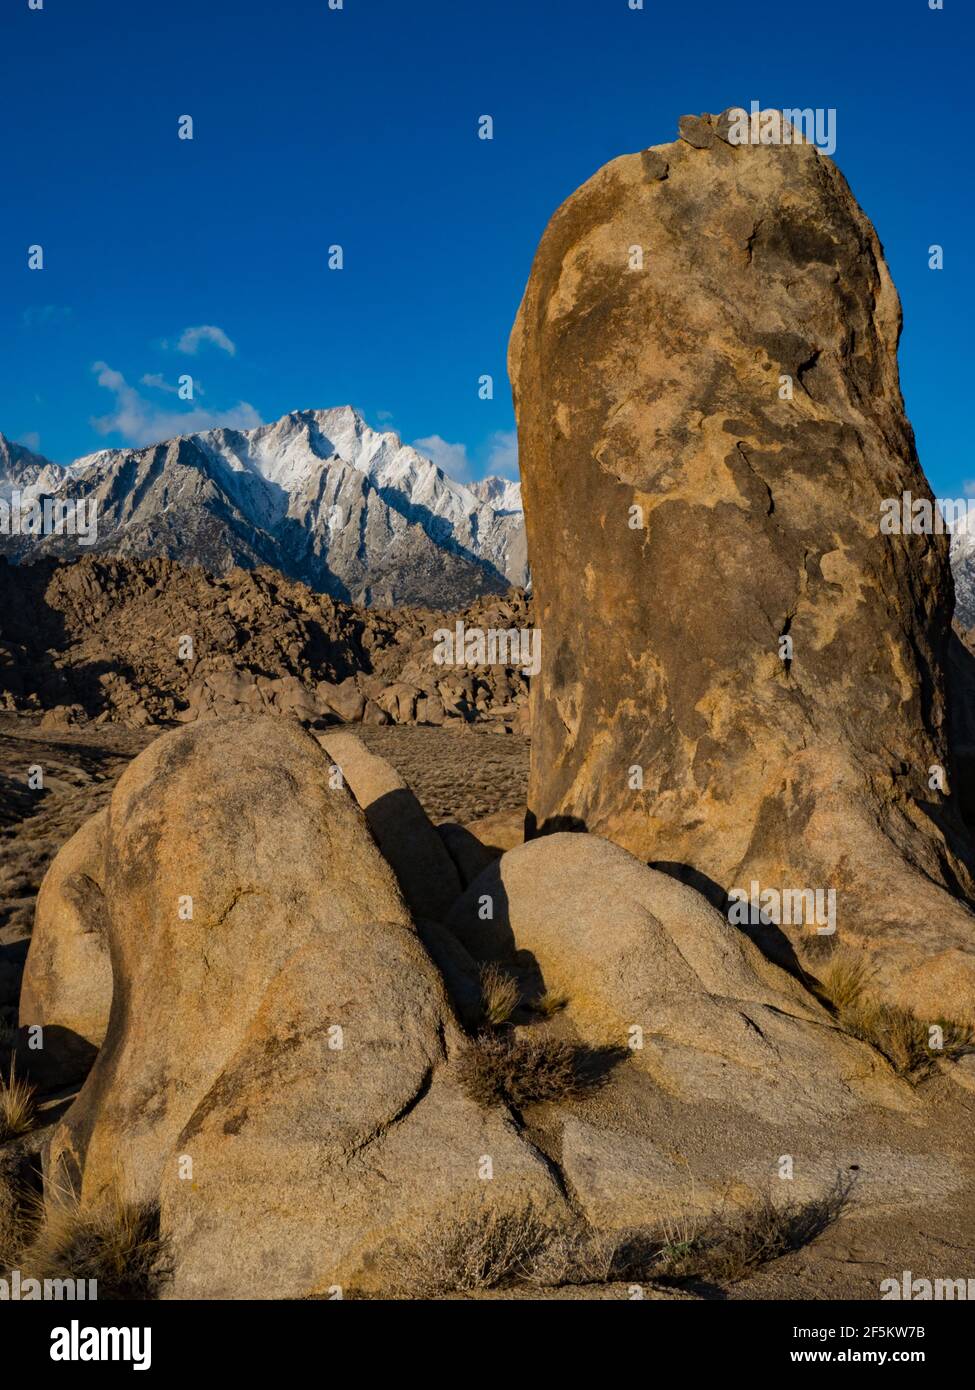 Spectacular scenery of the Alabama hills looking towards Mount Whitney in the east sierra near Lone Pine, California, USA Stock Photo